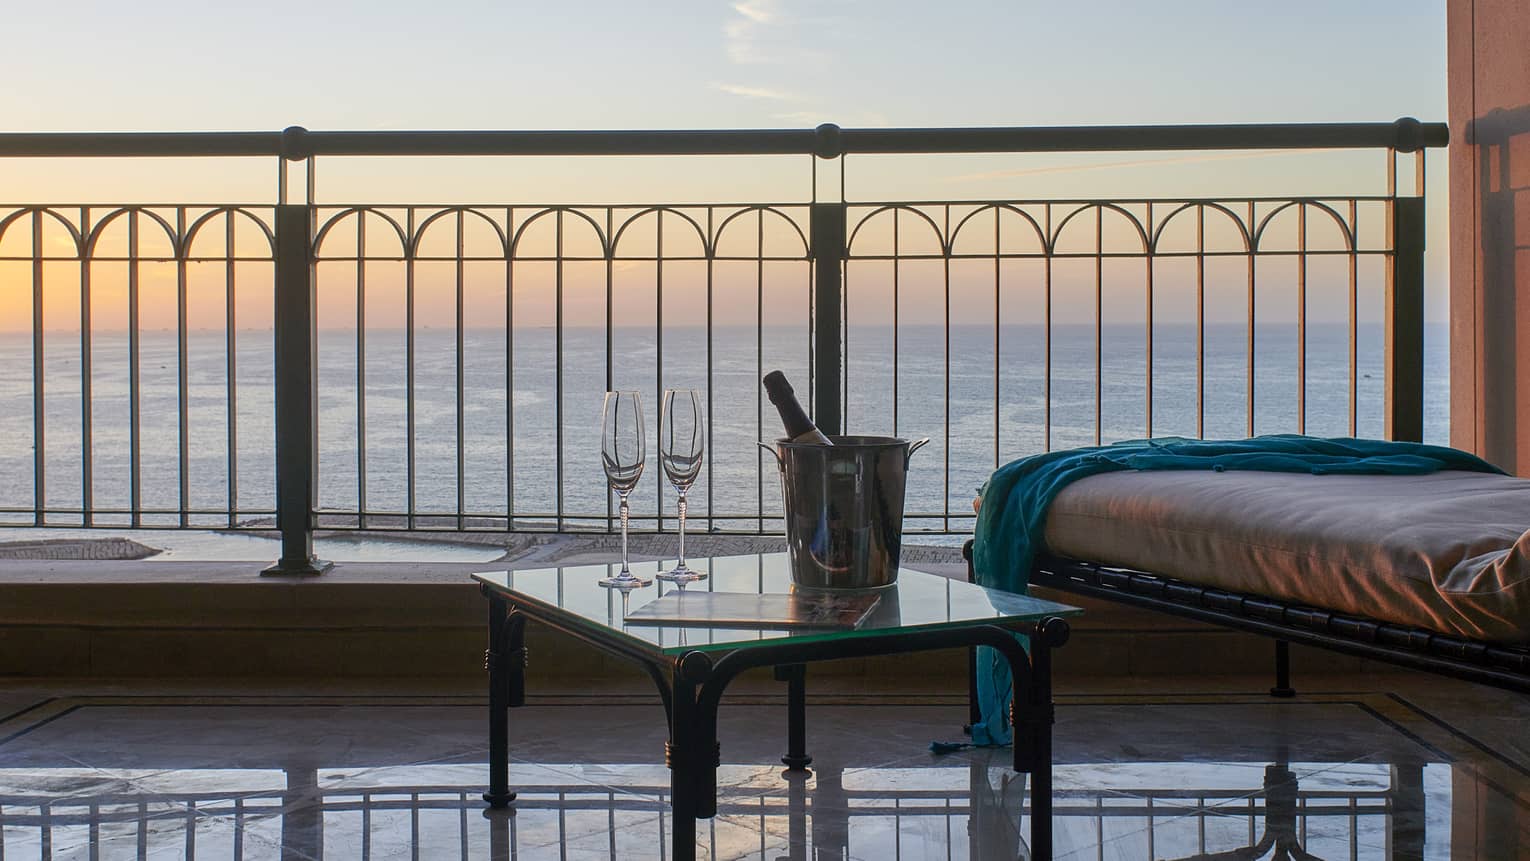 Suite balcony with longue chair, side table with champagne, sea views at sunset